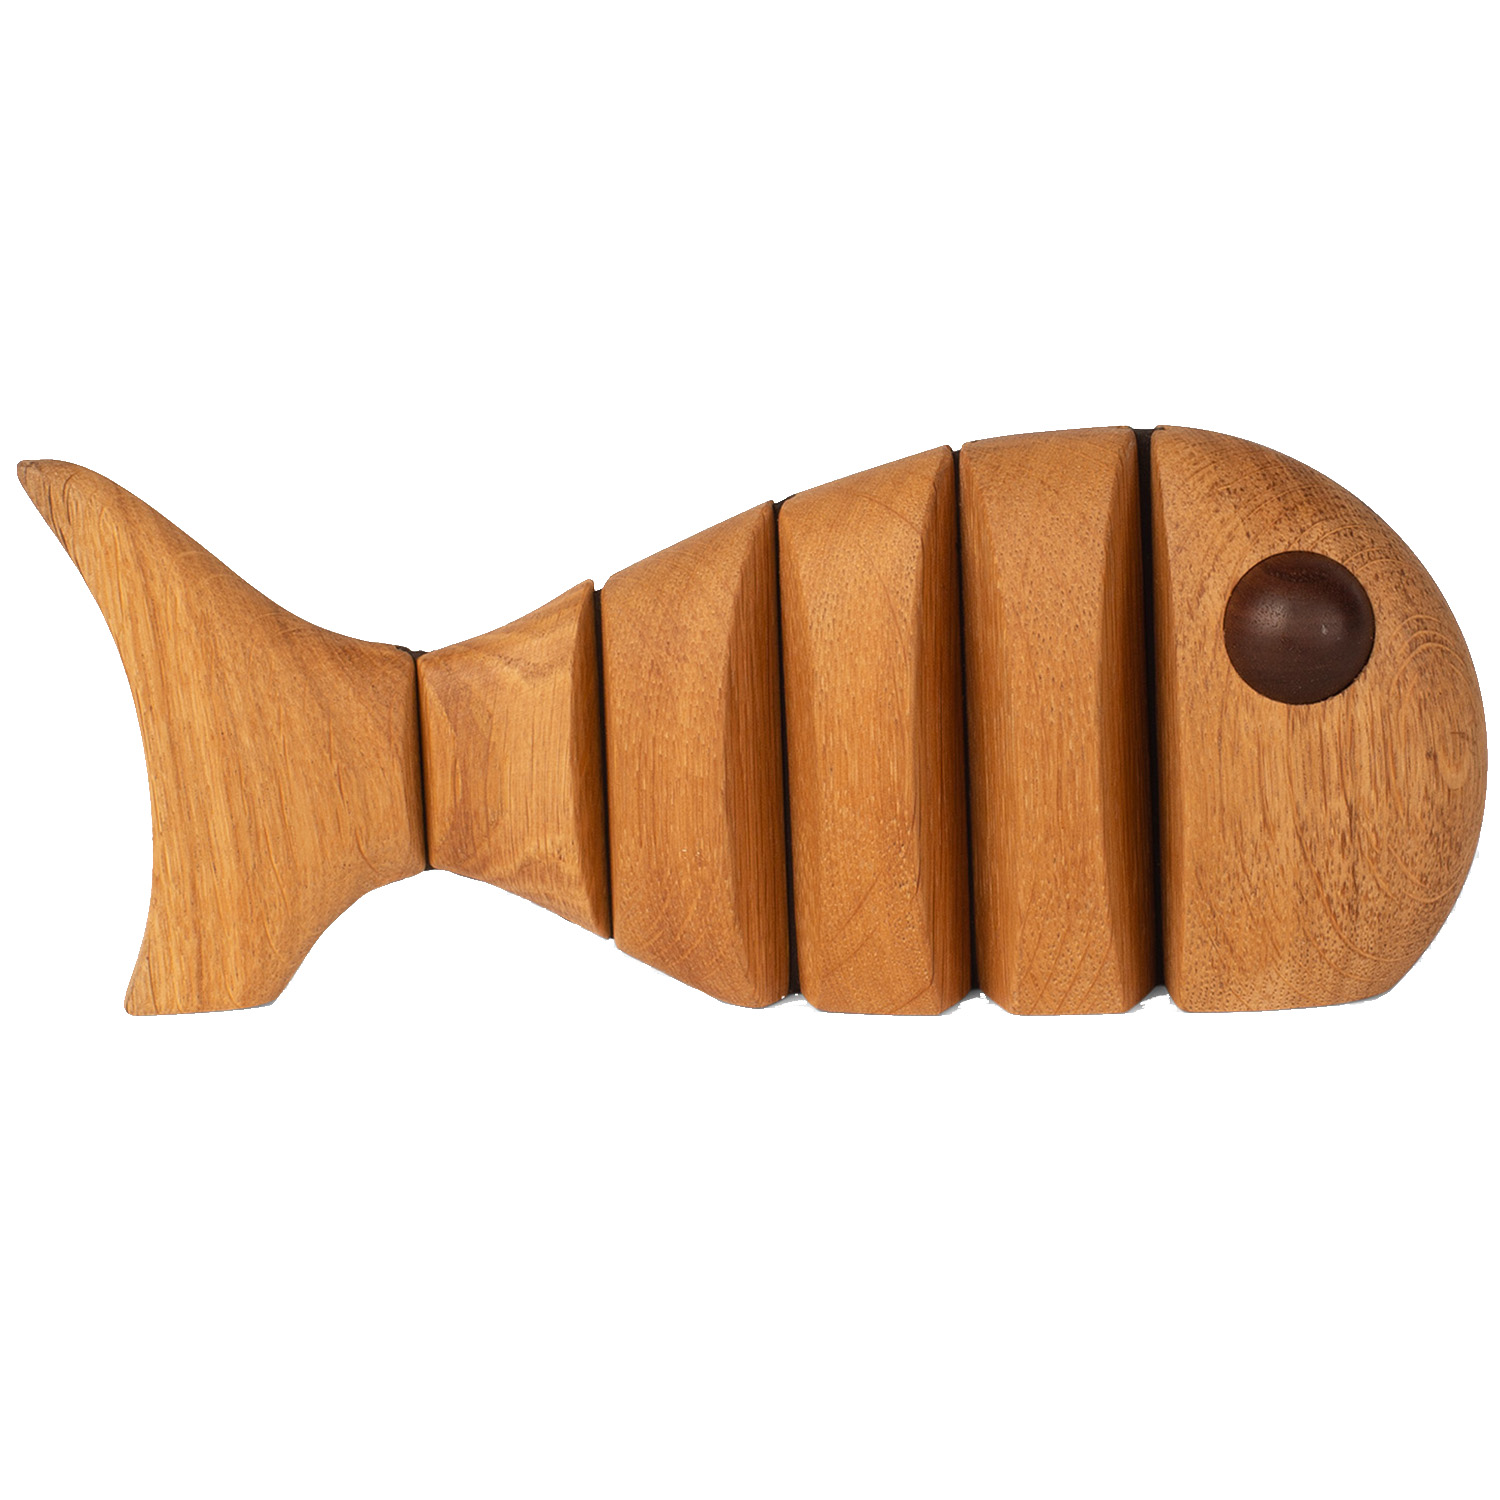 Wooden Fish figurines toys- 11 pieces $104.00